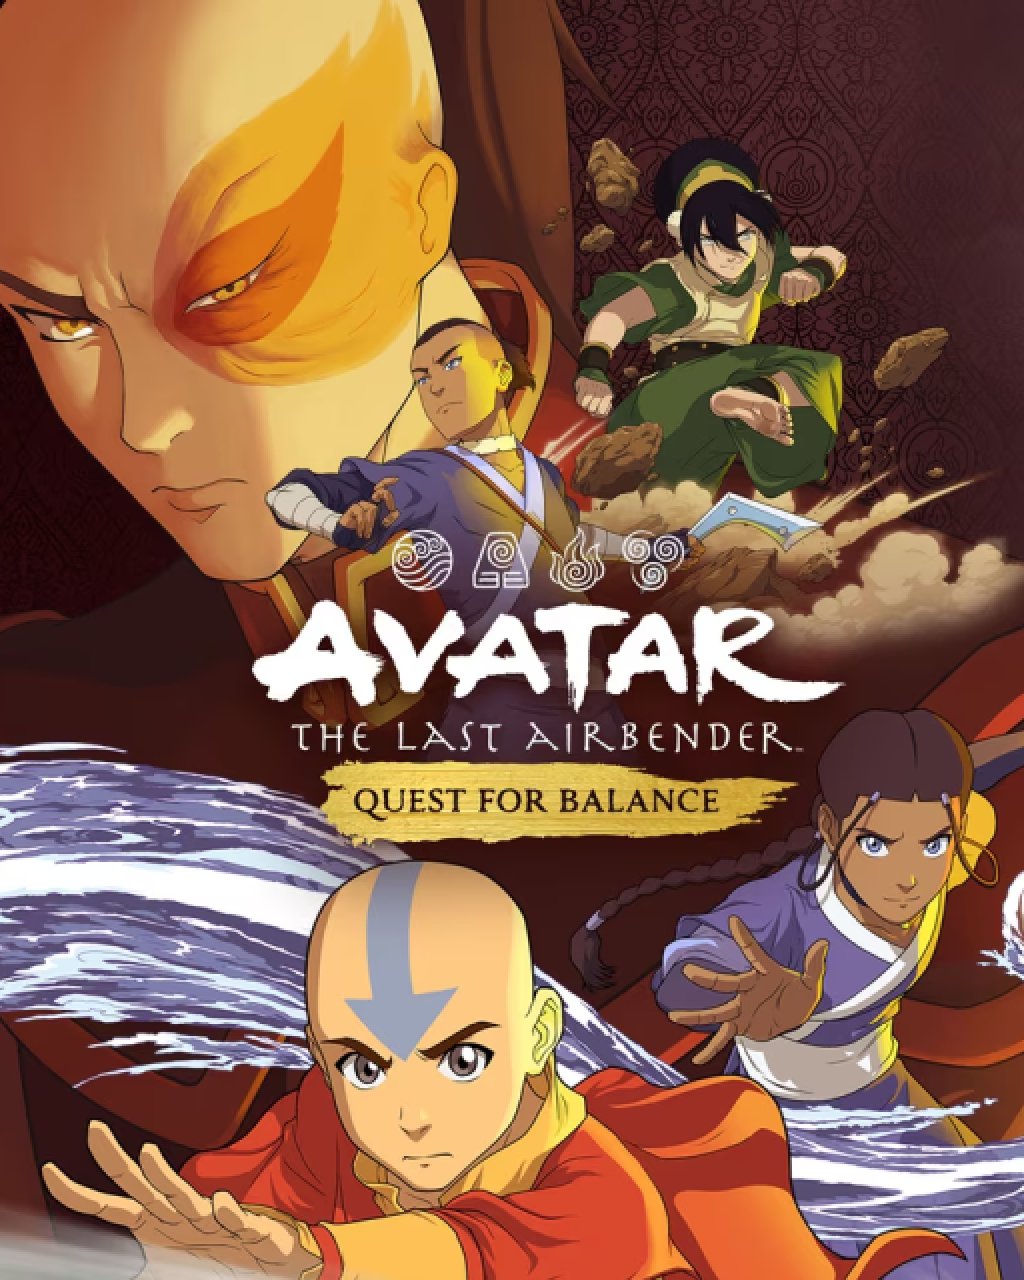 Avatar The Last Airbender Quest for Balance